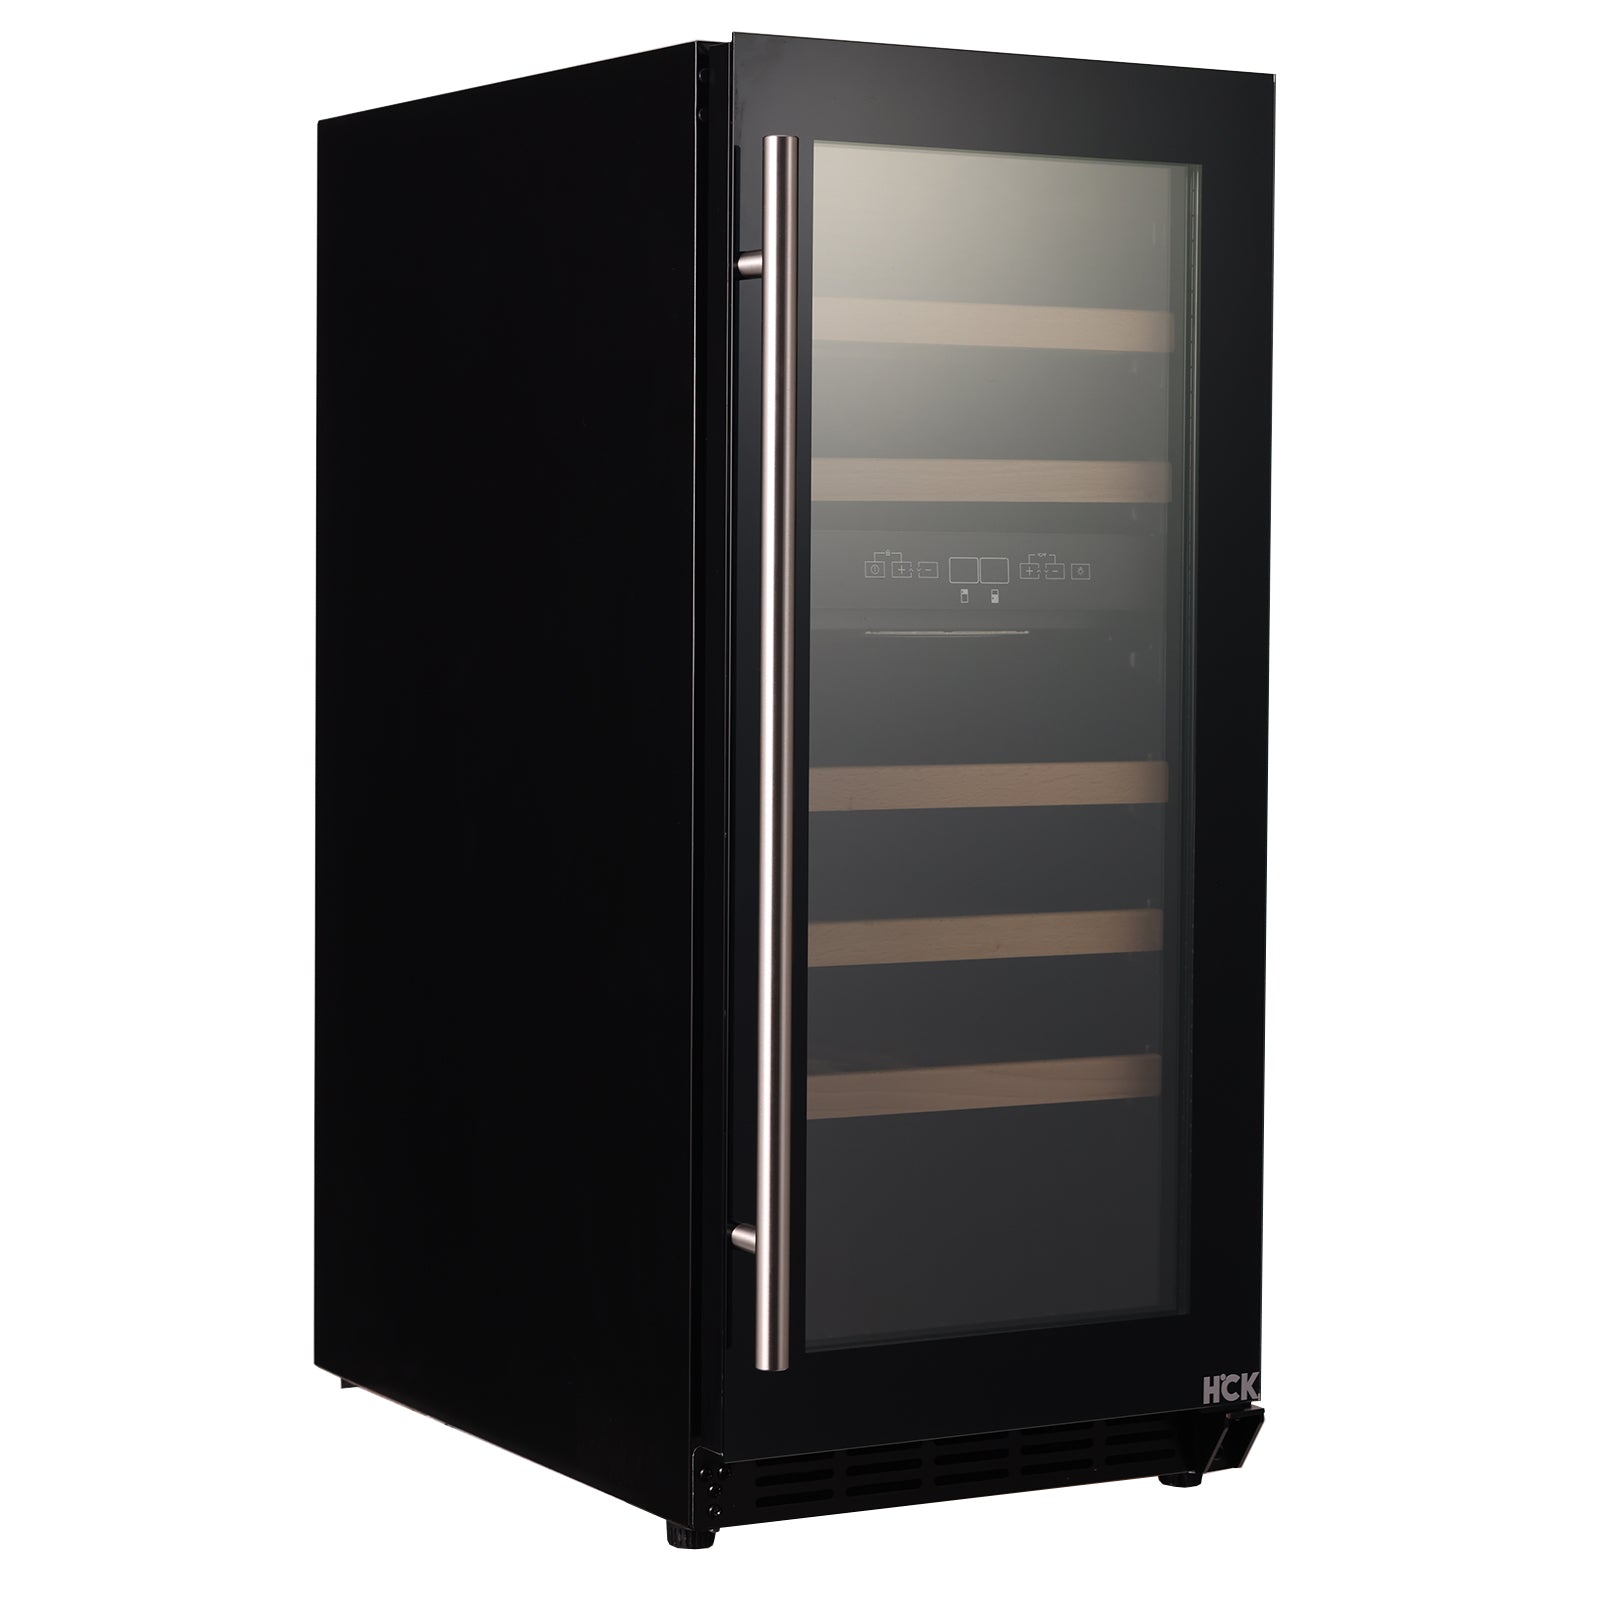 Side view of a 2.9 Cu Ft Freestanding Dual Zone Wine Cooler 29 bottles with the door open, showcasing fully-stocked wine bottles on 5 wooden shelves and a digital temperature control panel